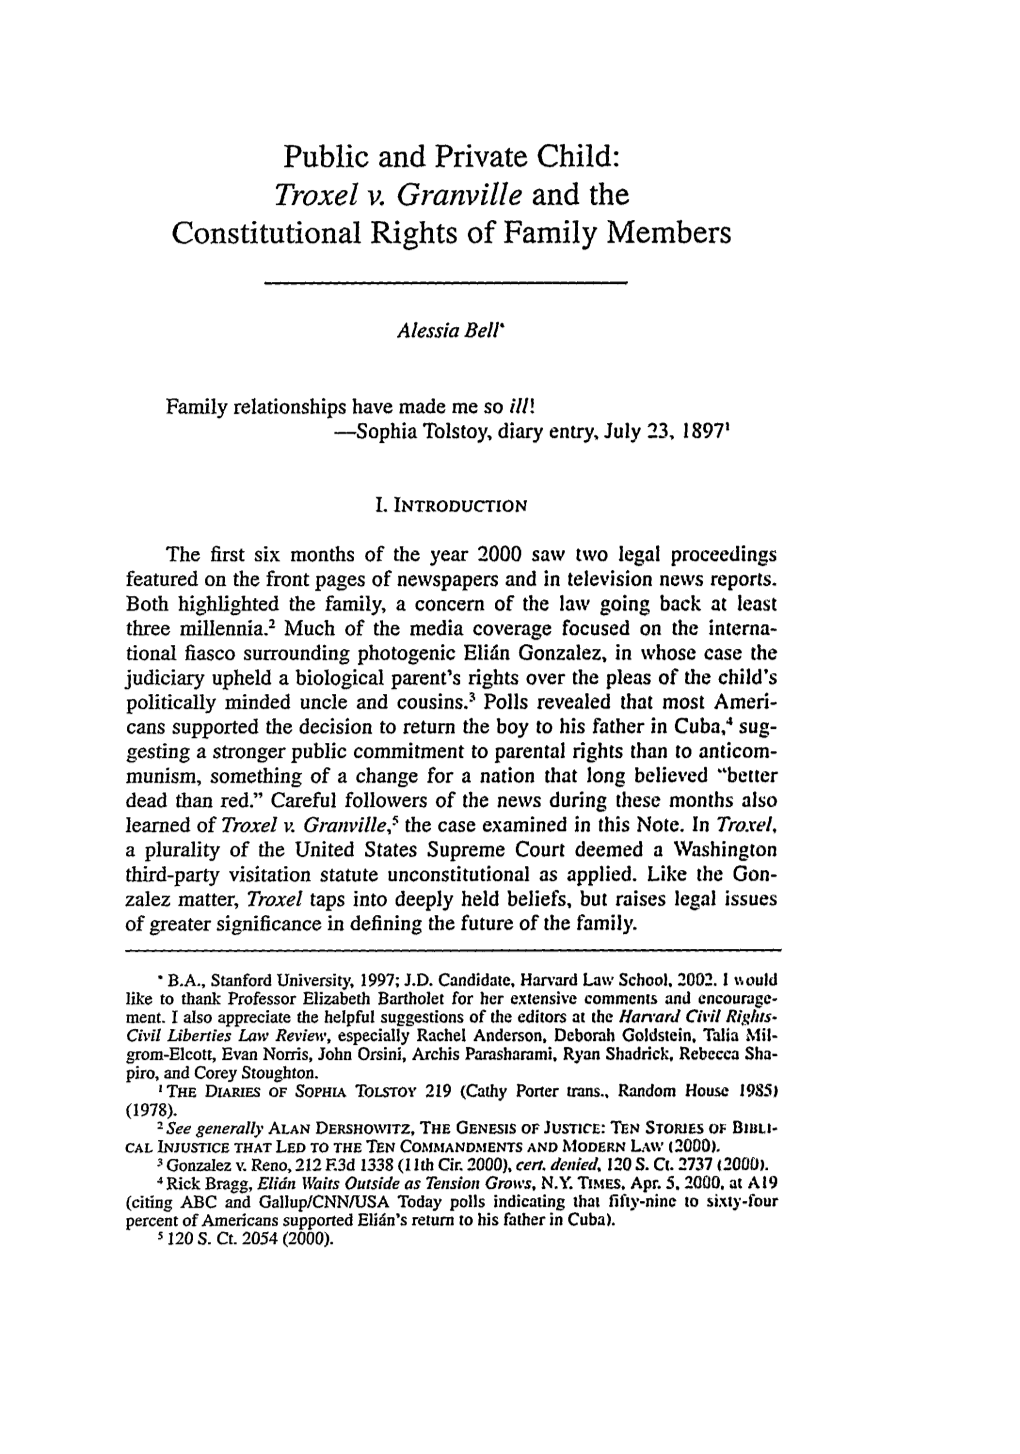 Public and Private Child: Troxel V. Granville and the Constitutional Rights of Family Members